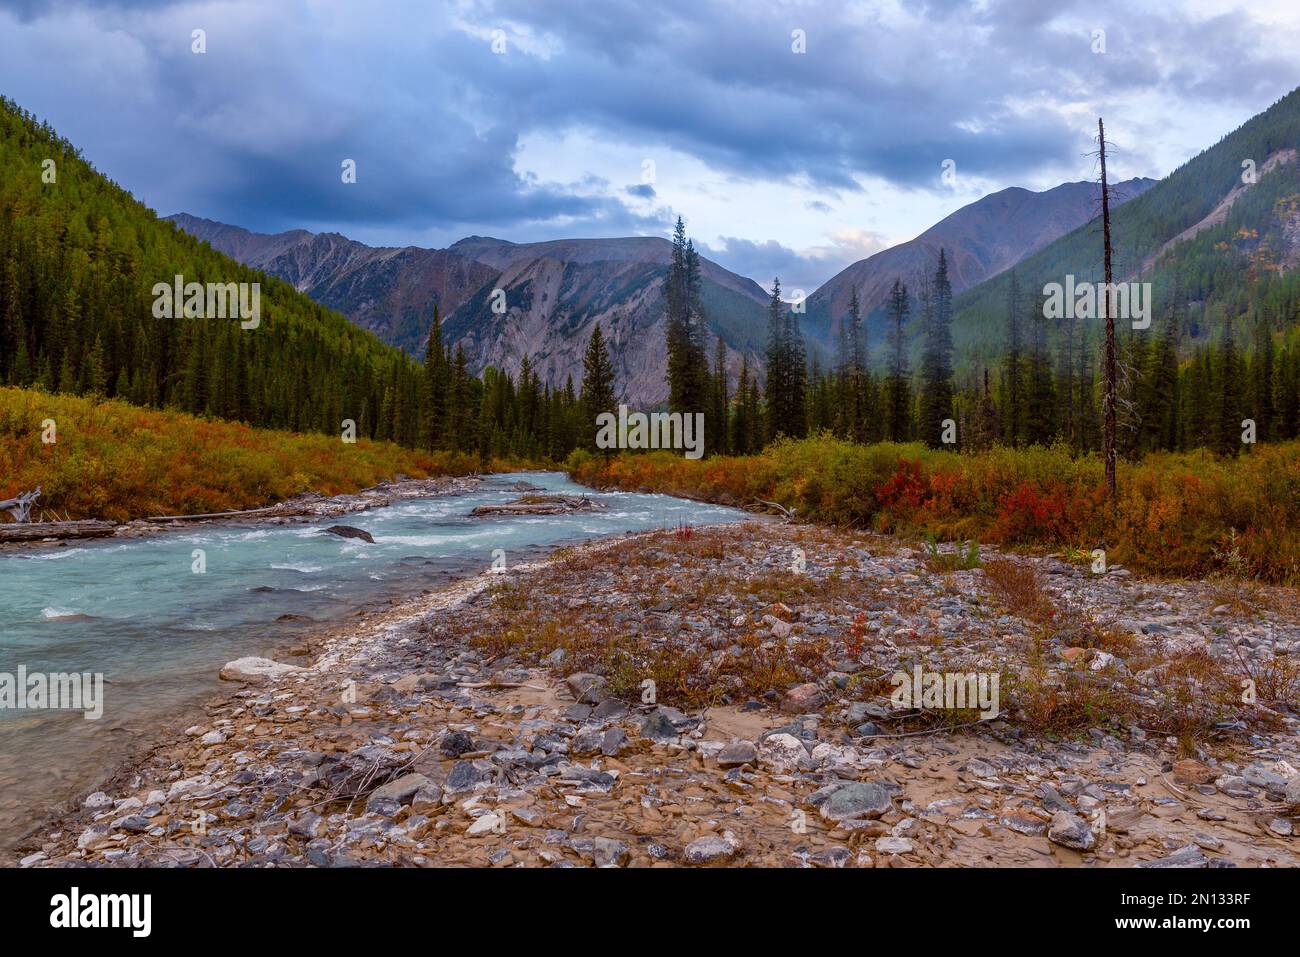 The drying bed of the alpine river Shavla in autumn with stones against the background of a rainy sky and mountains with a spruce forest in Altai. Stock Photo